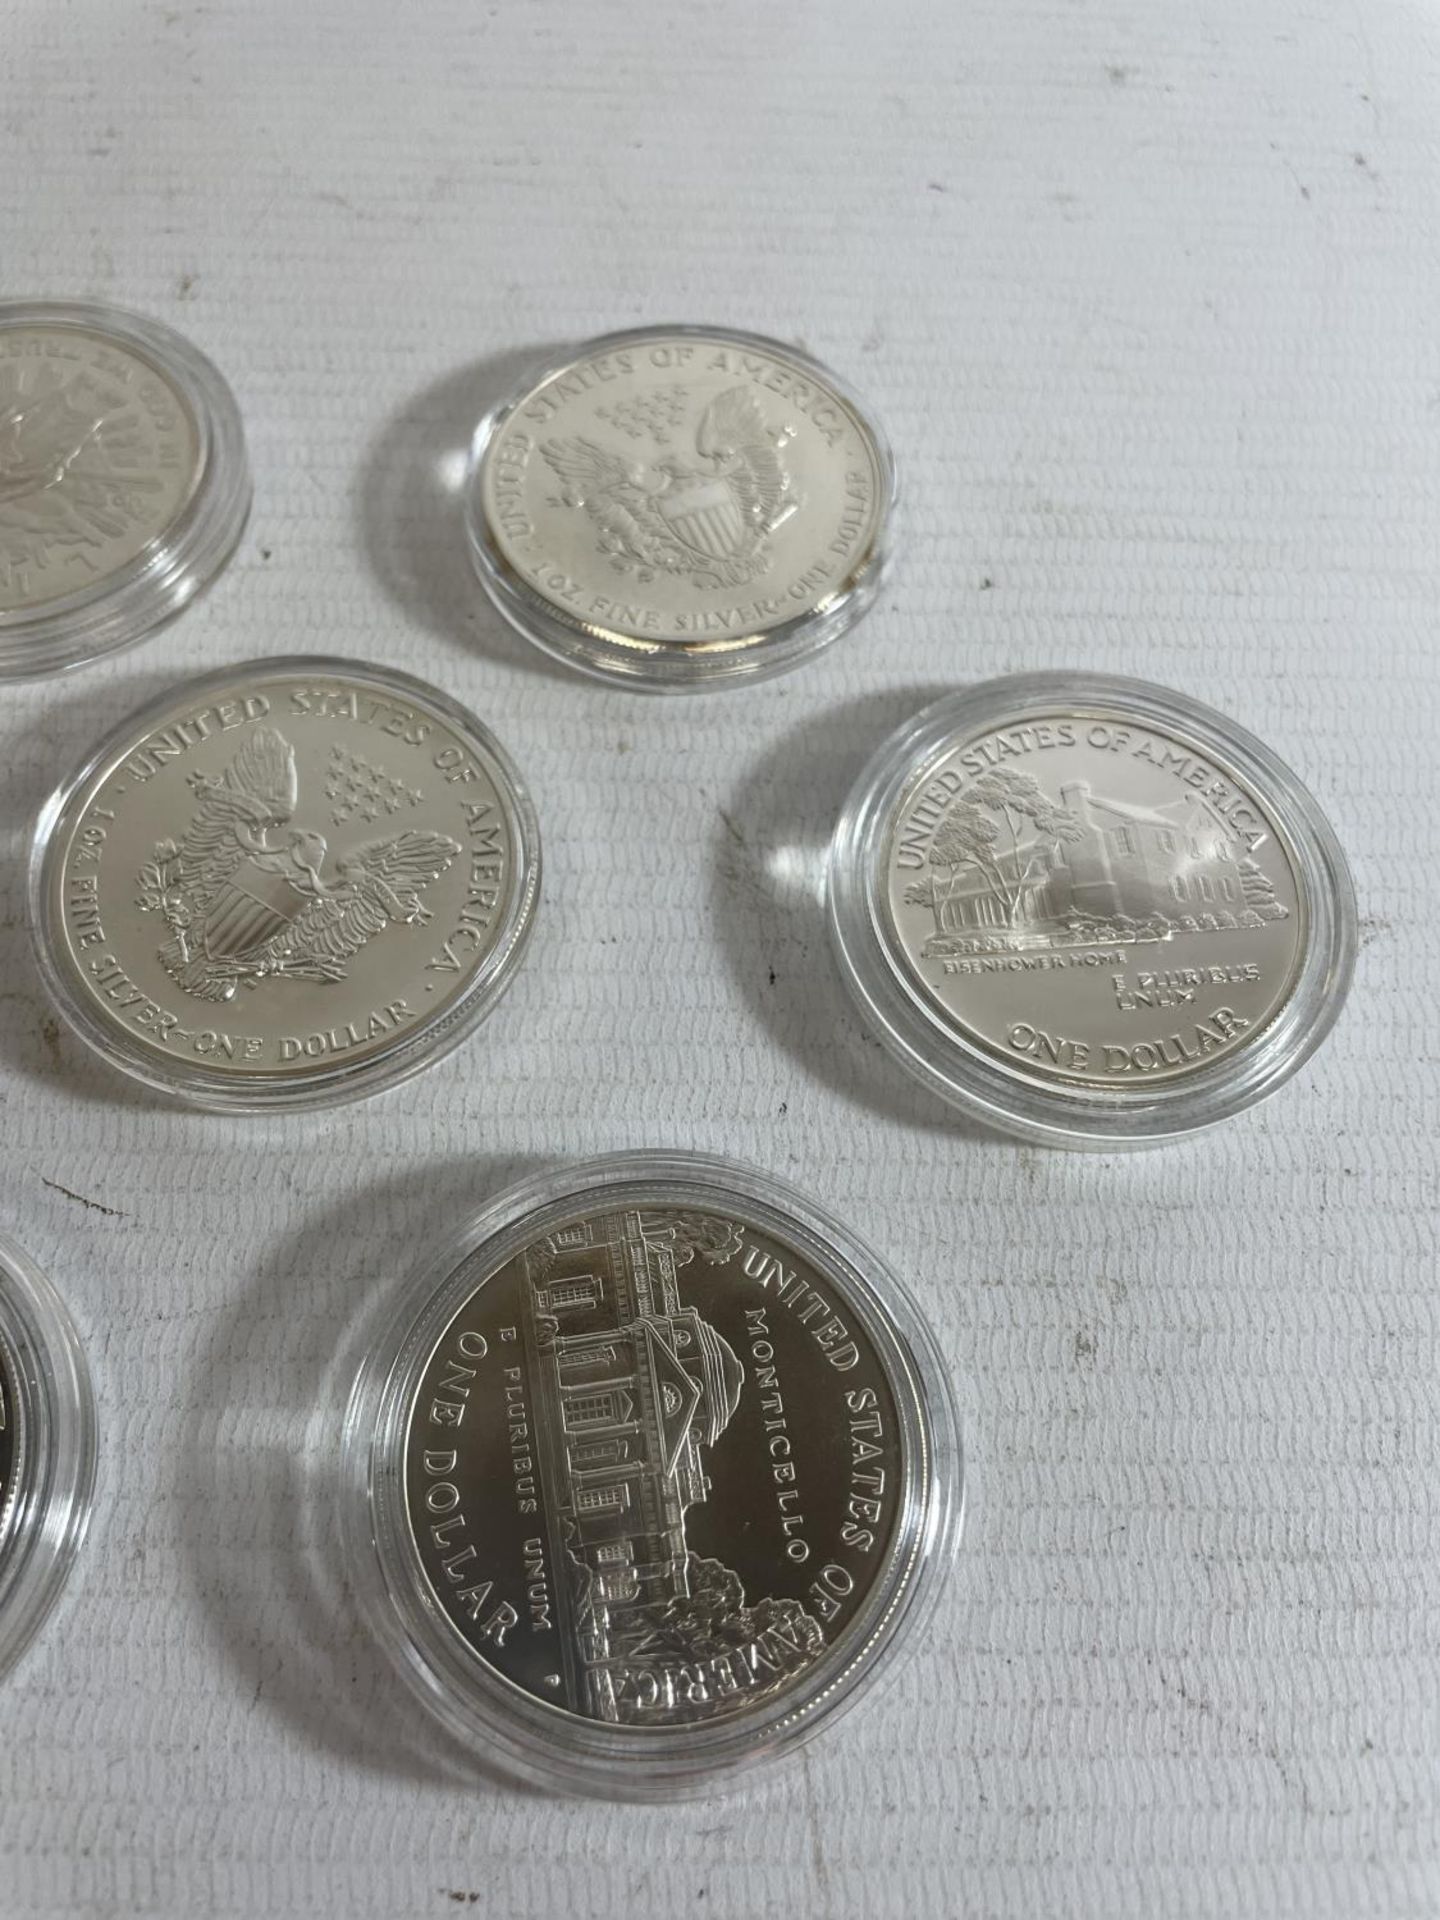 A SELECTION OF 10 USA SILVER $1 COINS , EACH ENCAPSULATED , DATED : 1890, 1922, 1987-8 , 1989 X 2, - Image 4 of 4